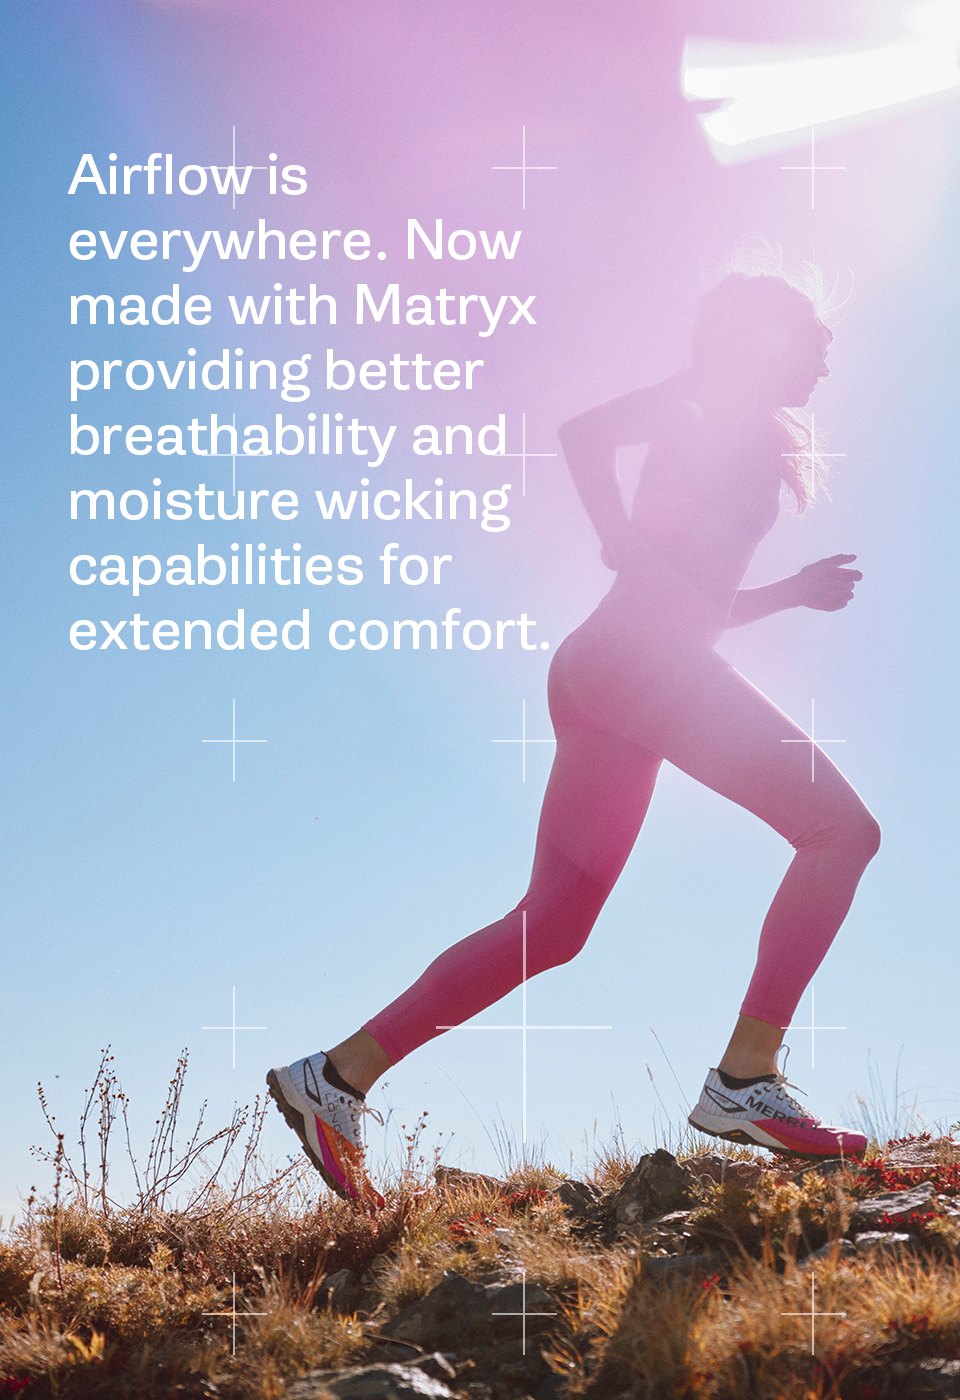 Airflow is everywhere. Now made with Matryx providing better breathability and moisture wicking capabilities for extended comfort.